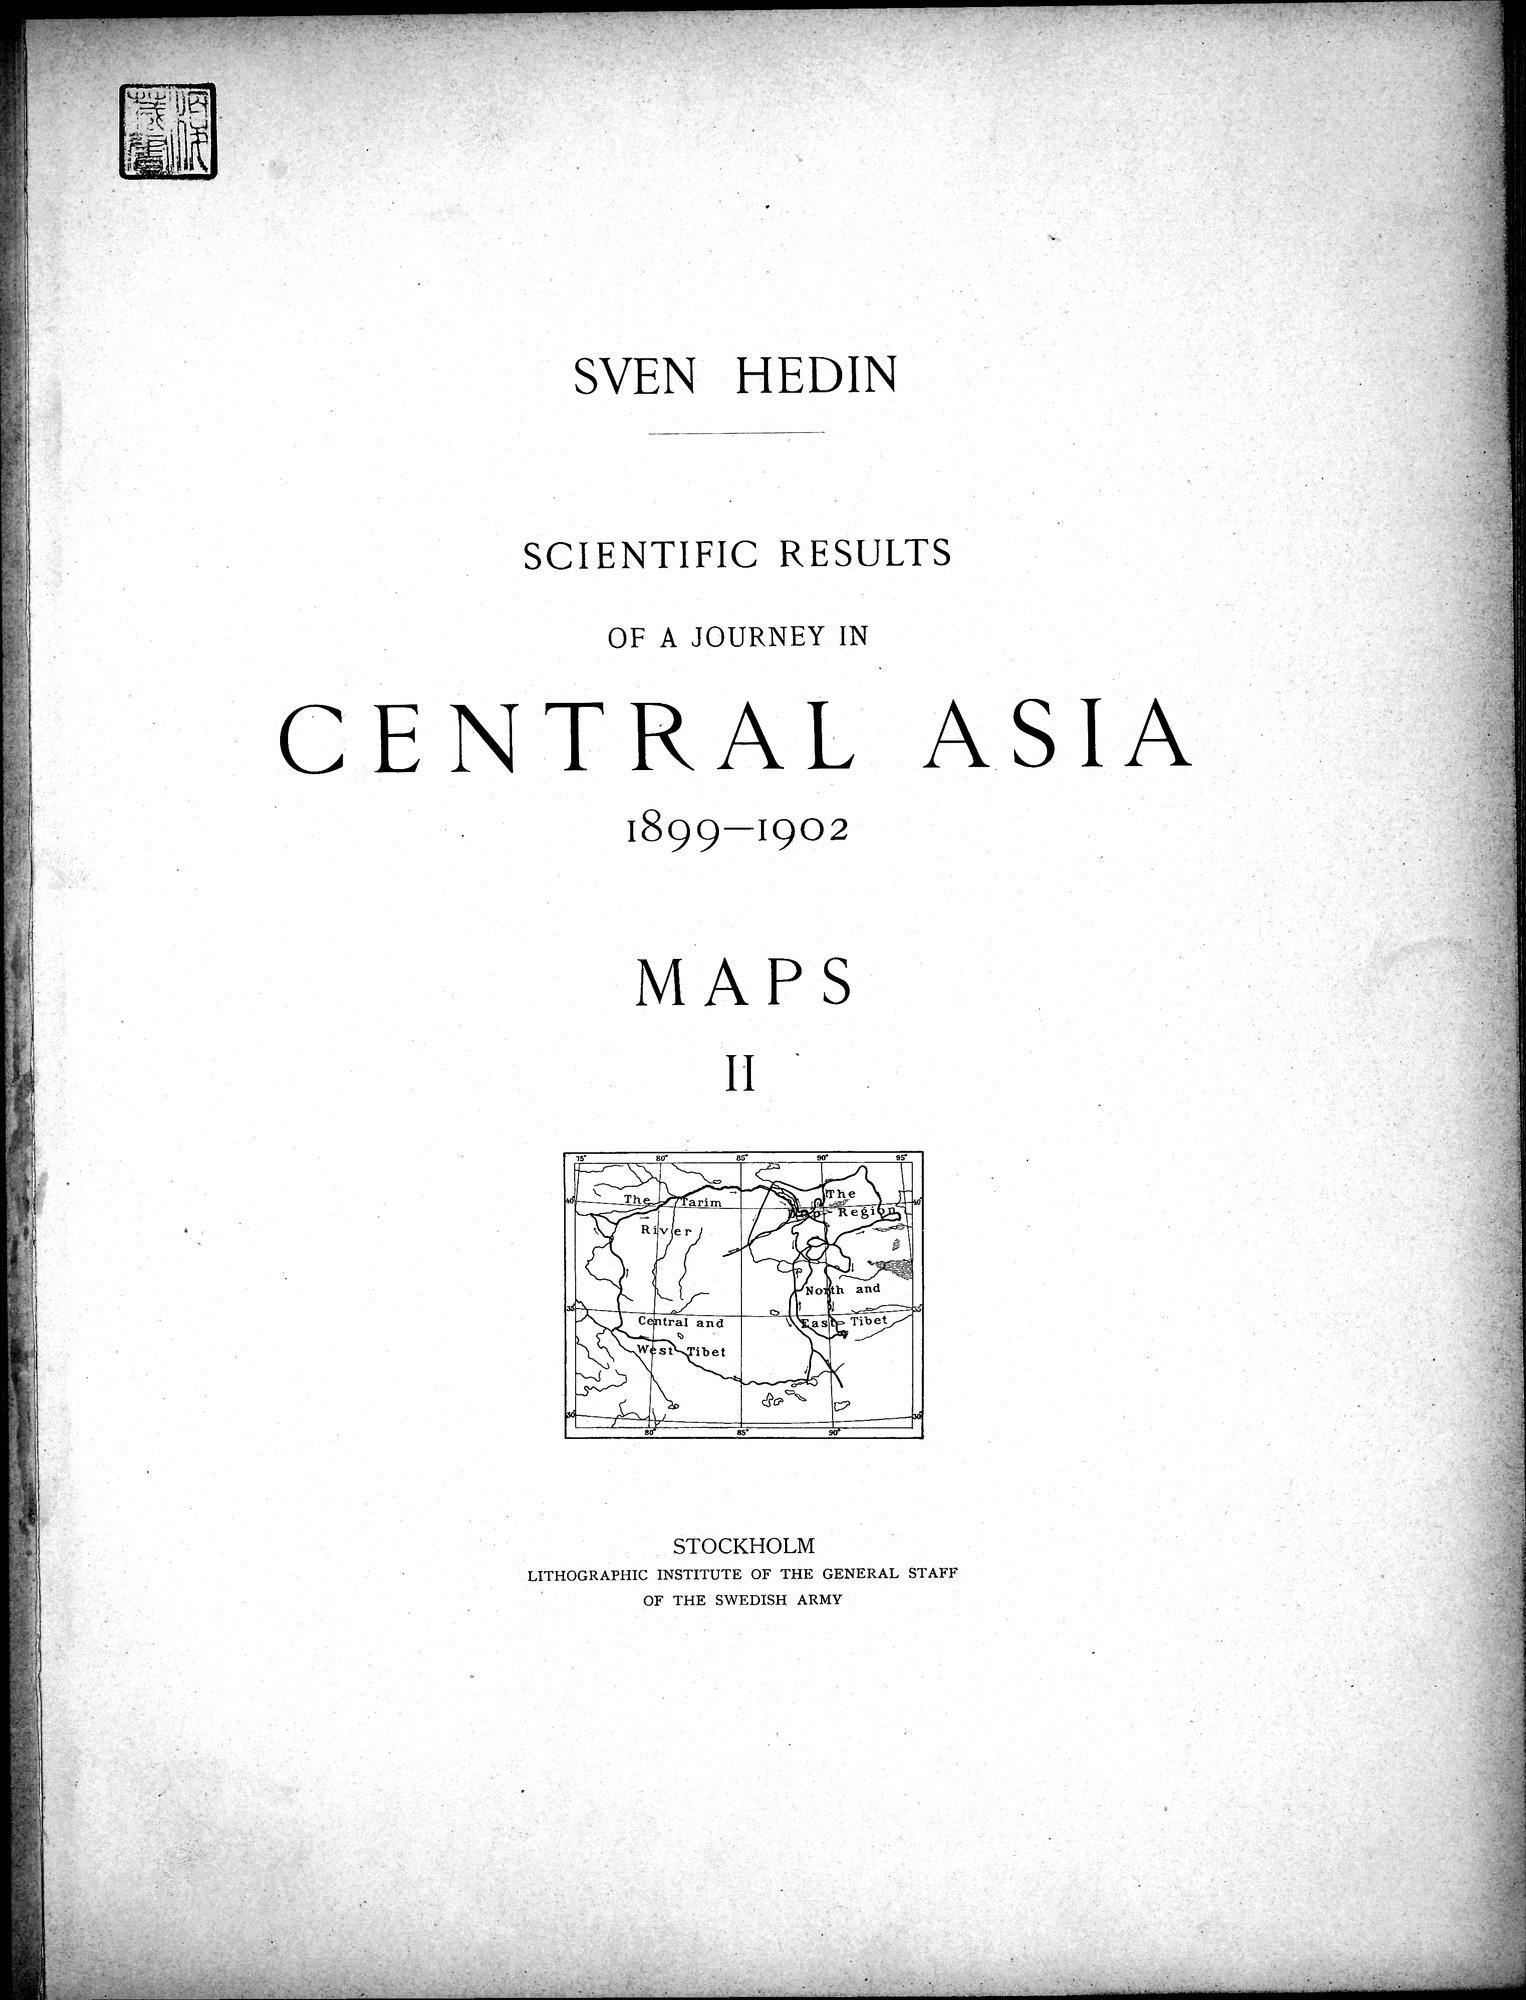 Scientific Results of a Journey in Central Asia, 1899-1902 : vol.8 / 7 ページ（白黒高解像度画像）